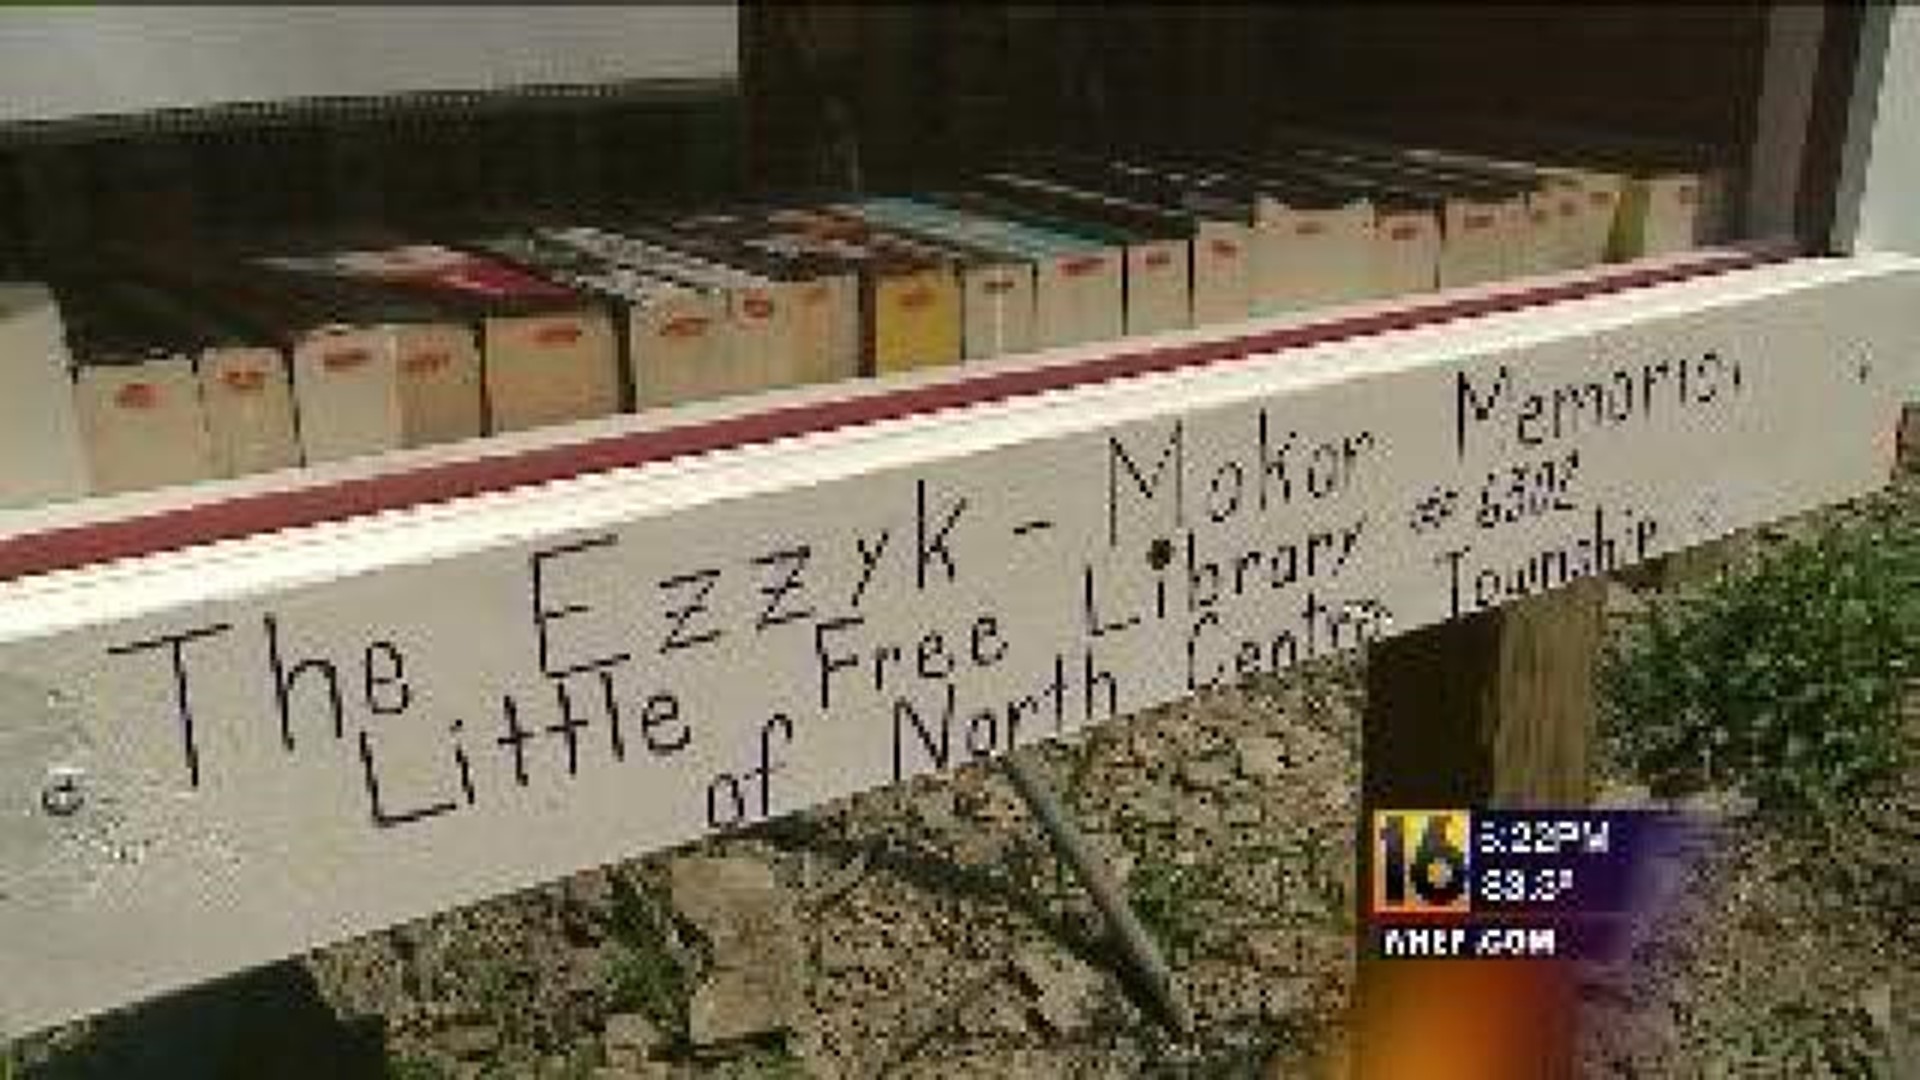 New Library Opens In Columbia County